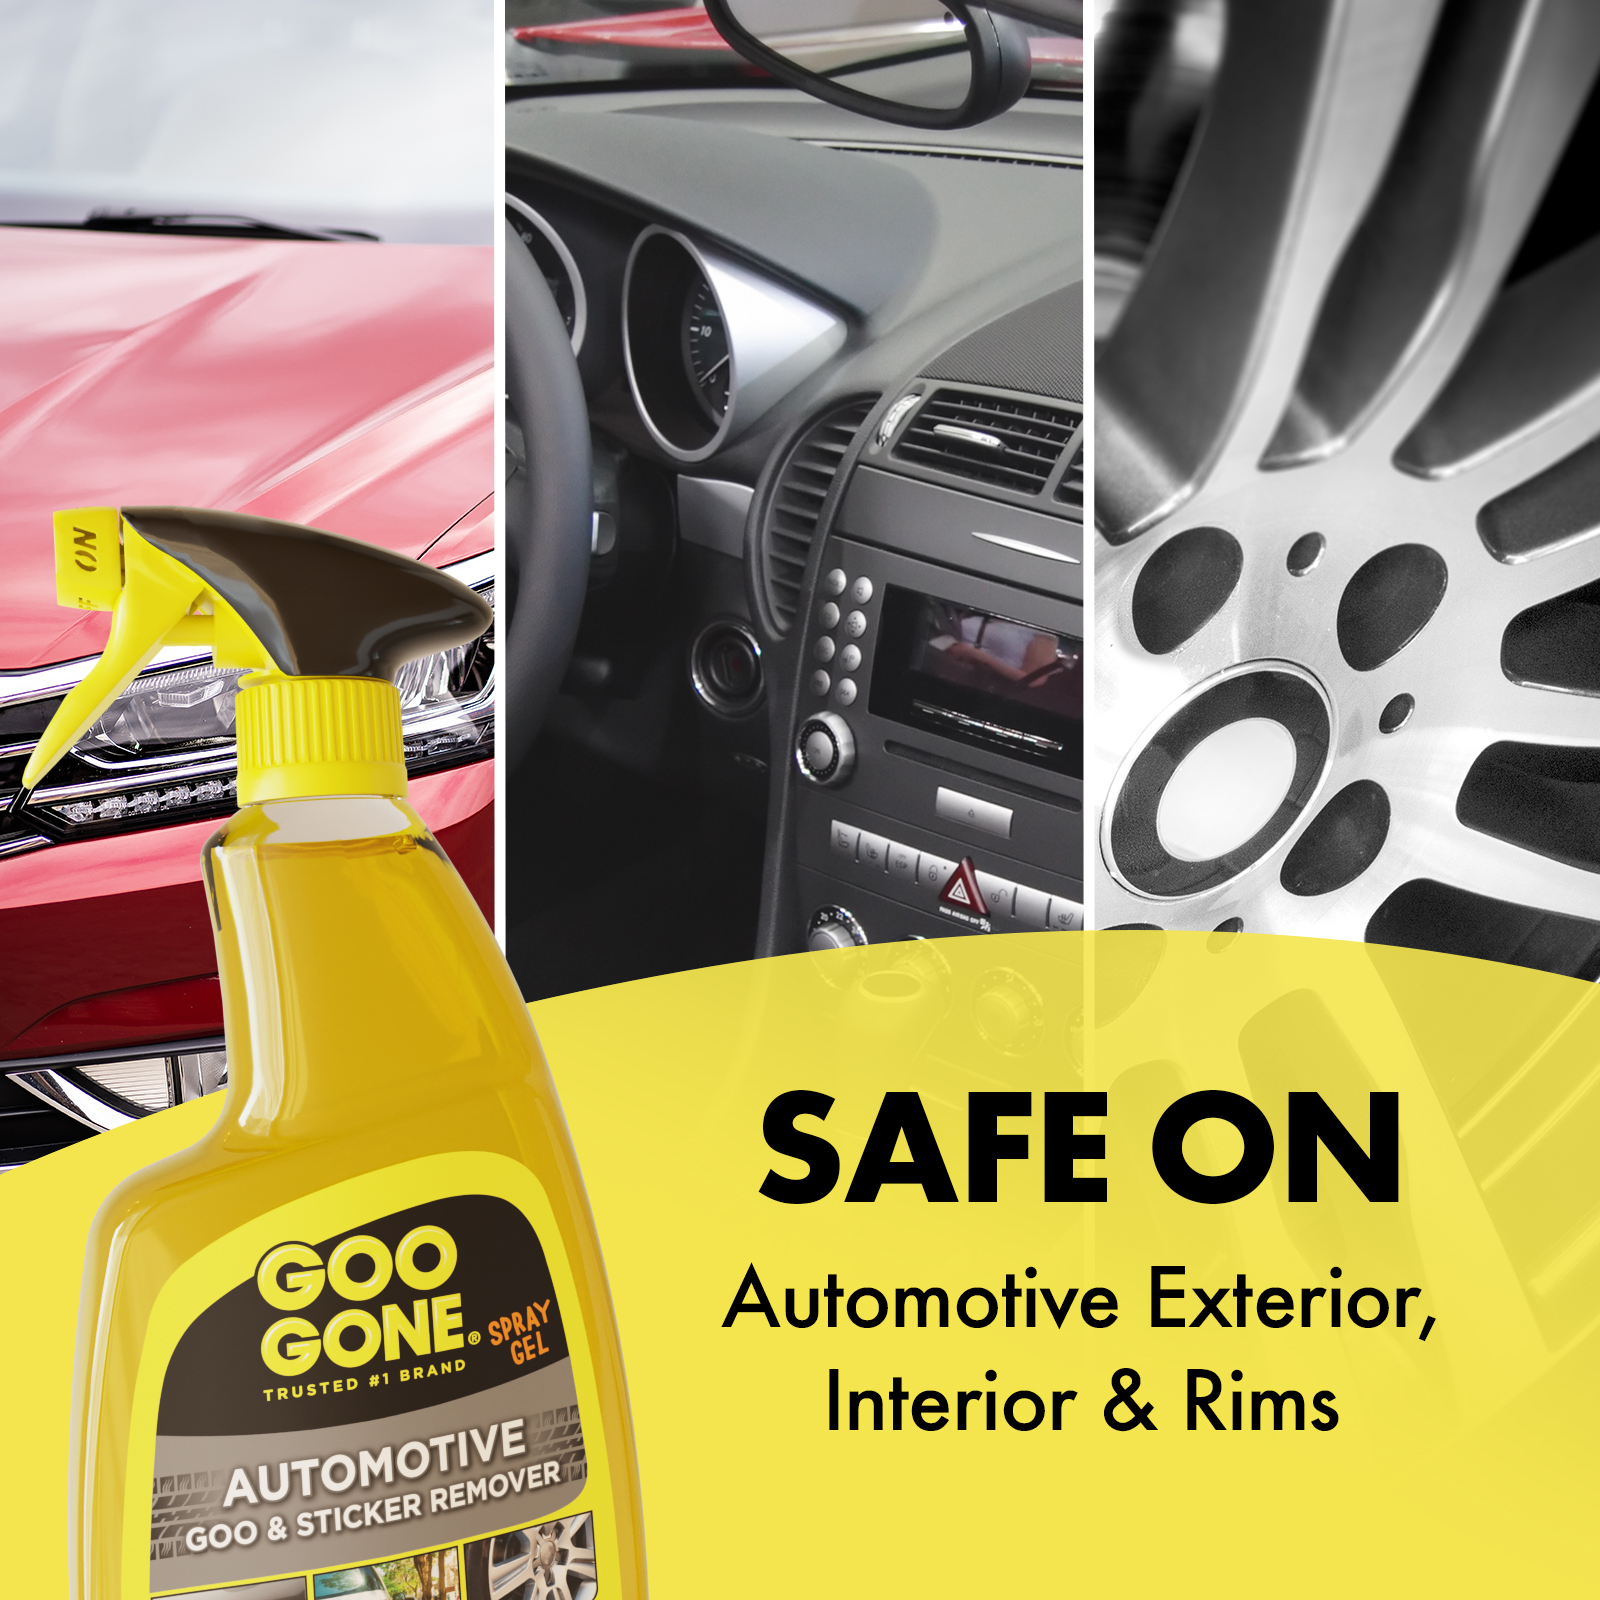 Goo Gone Automotive Adhesive Spray Gel Cleaner for Tires, Rims, Stickers, Bugs, Tar & Sap - 24 oz - image 3 of 8